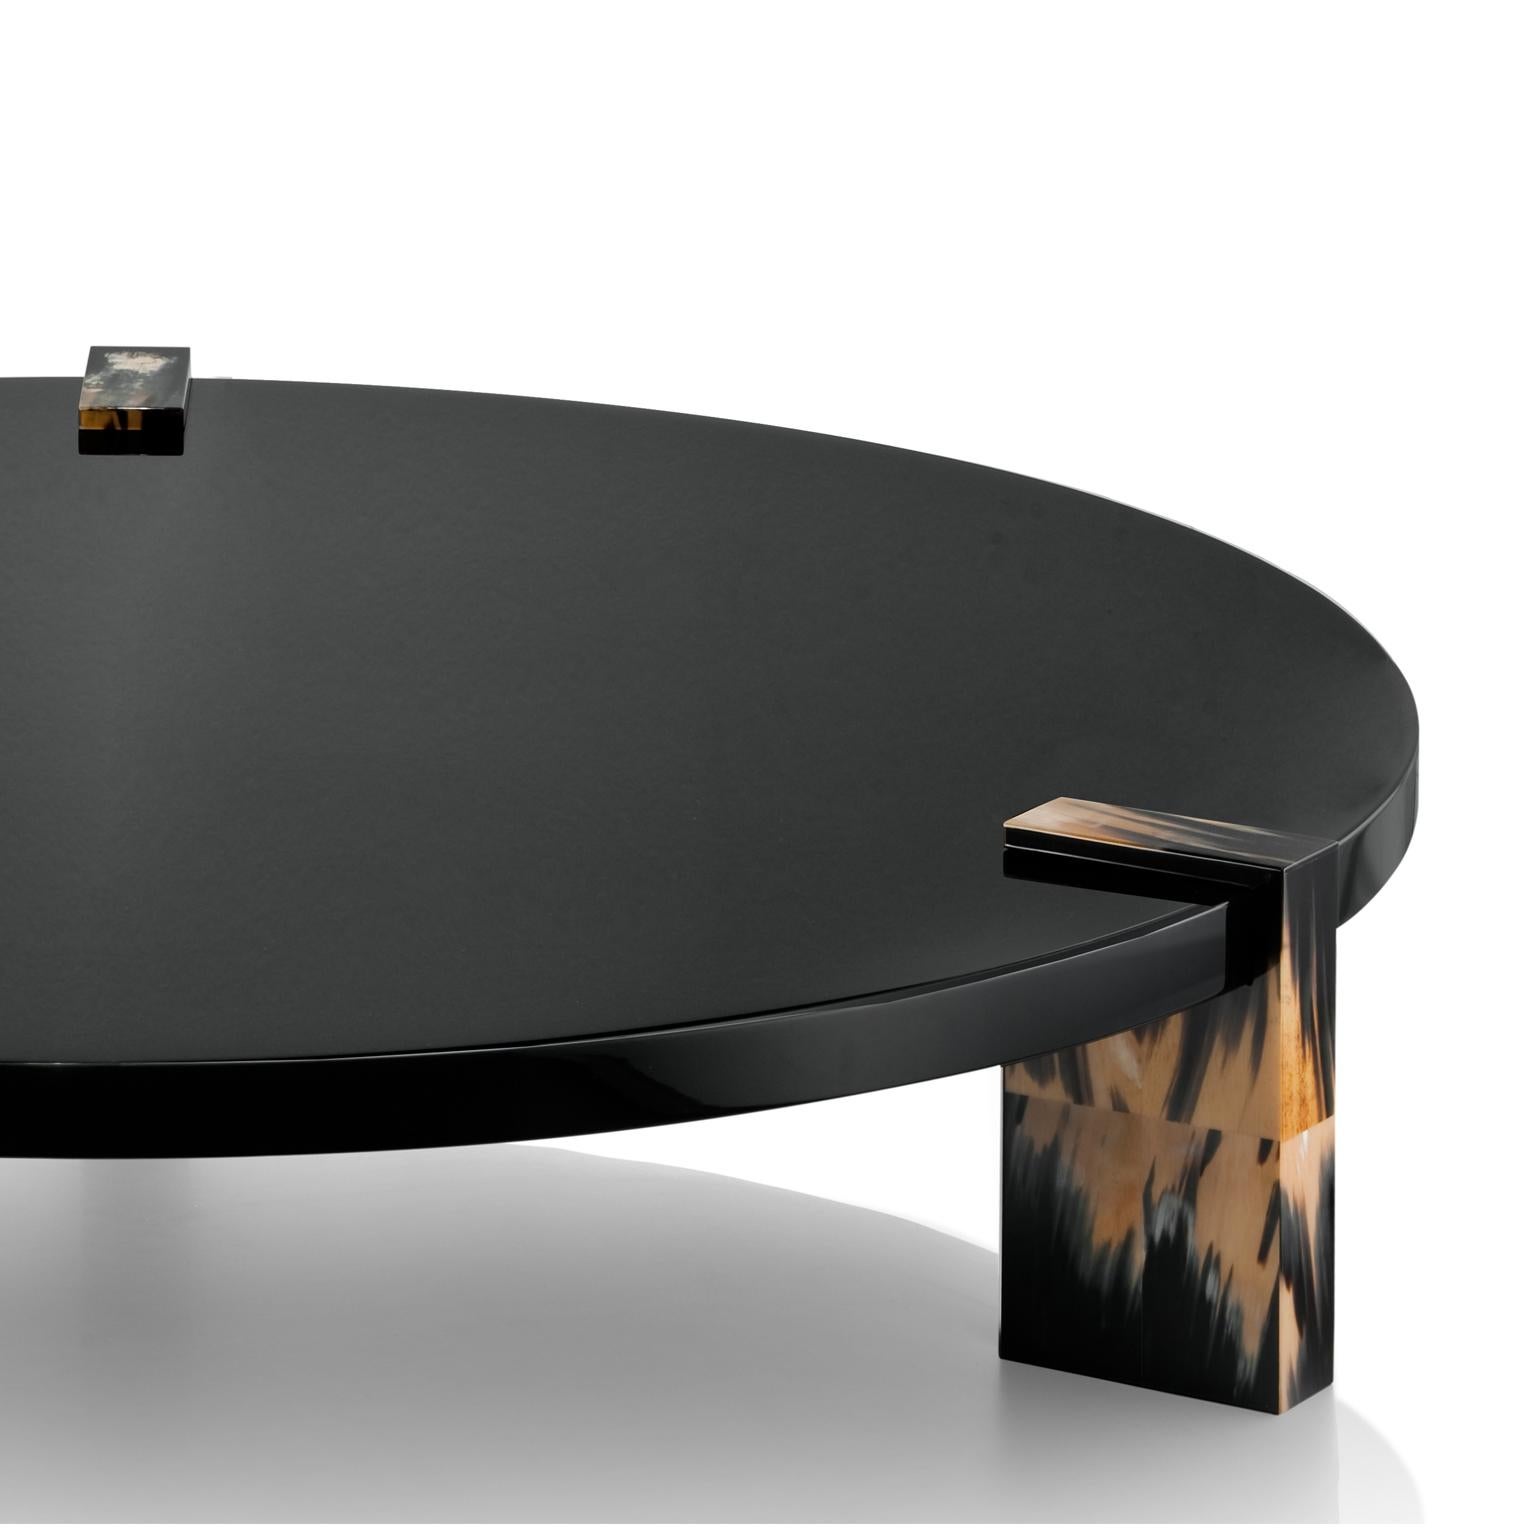 Paestum Coffee Table in Lacquered Wood with Legs in Corno Italiano, Mod. 1502 For Sale 2